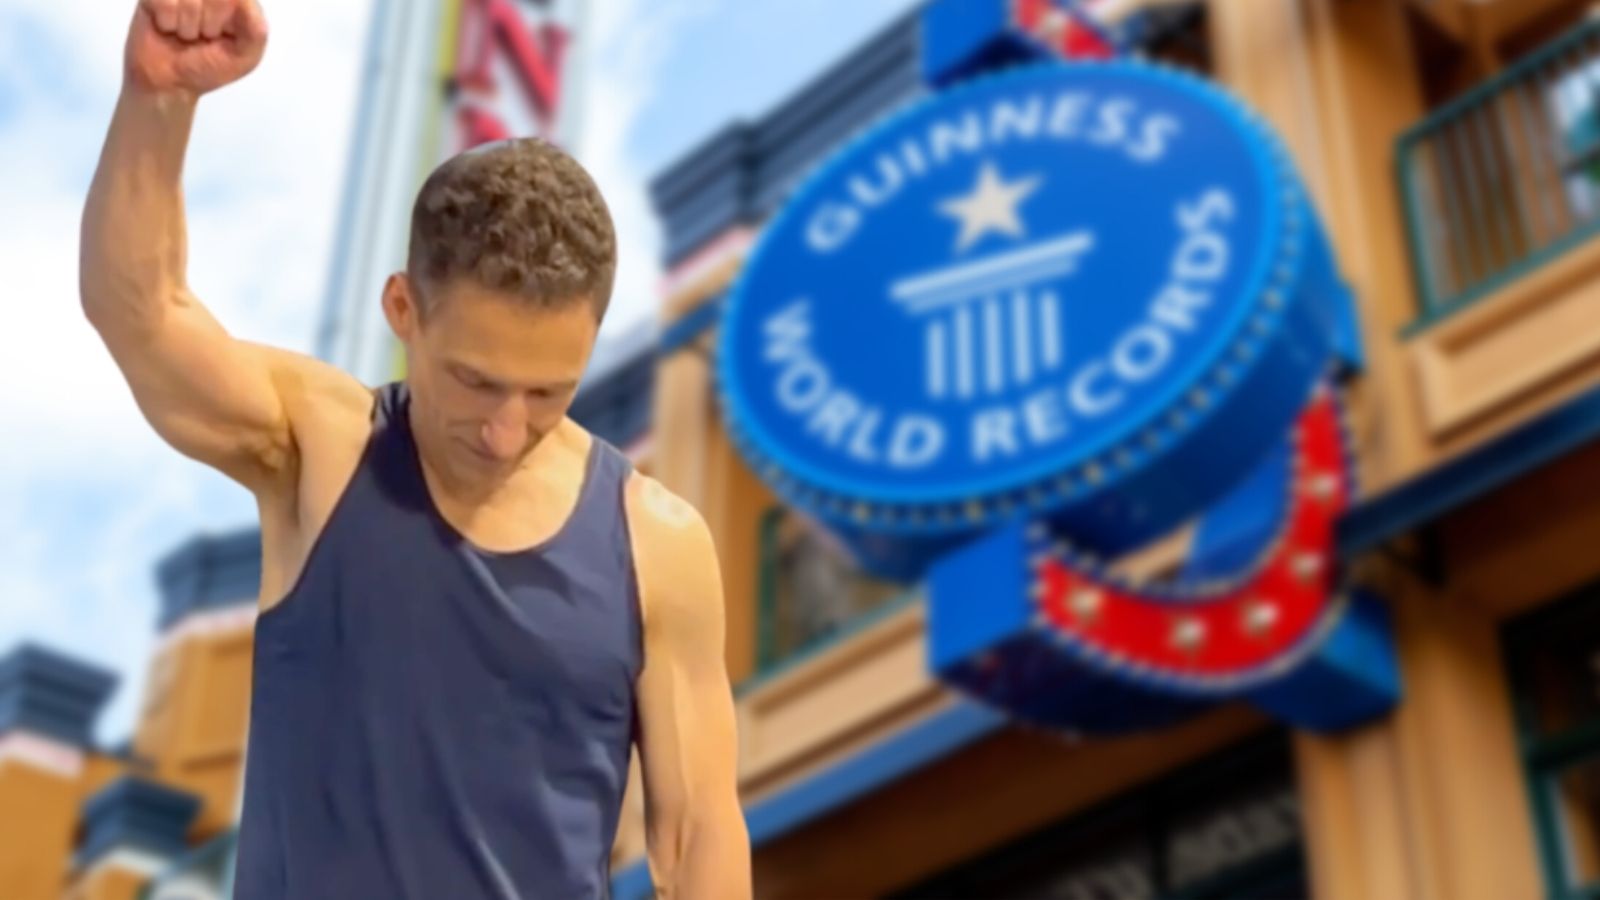 Joe DeMarco raises a fist in front of a Guinness World Records sign